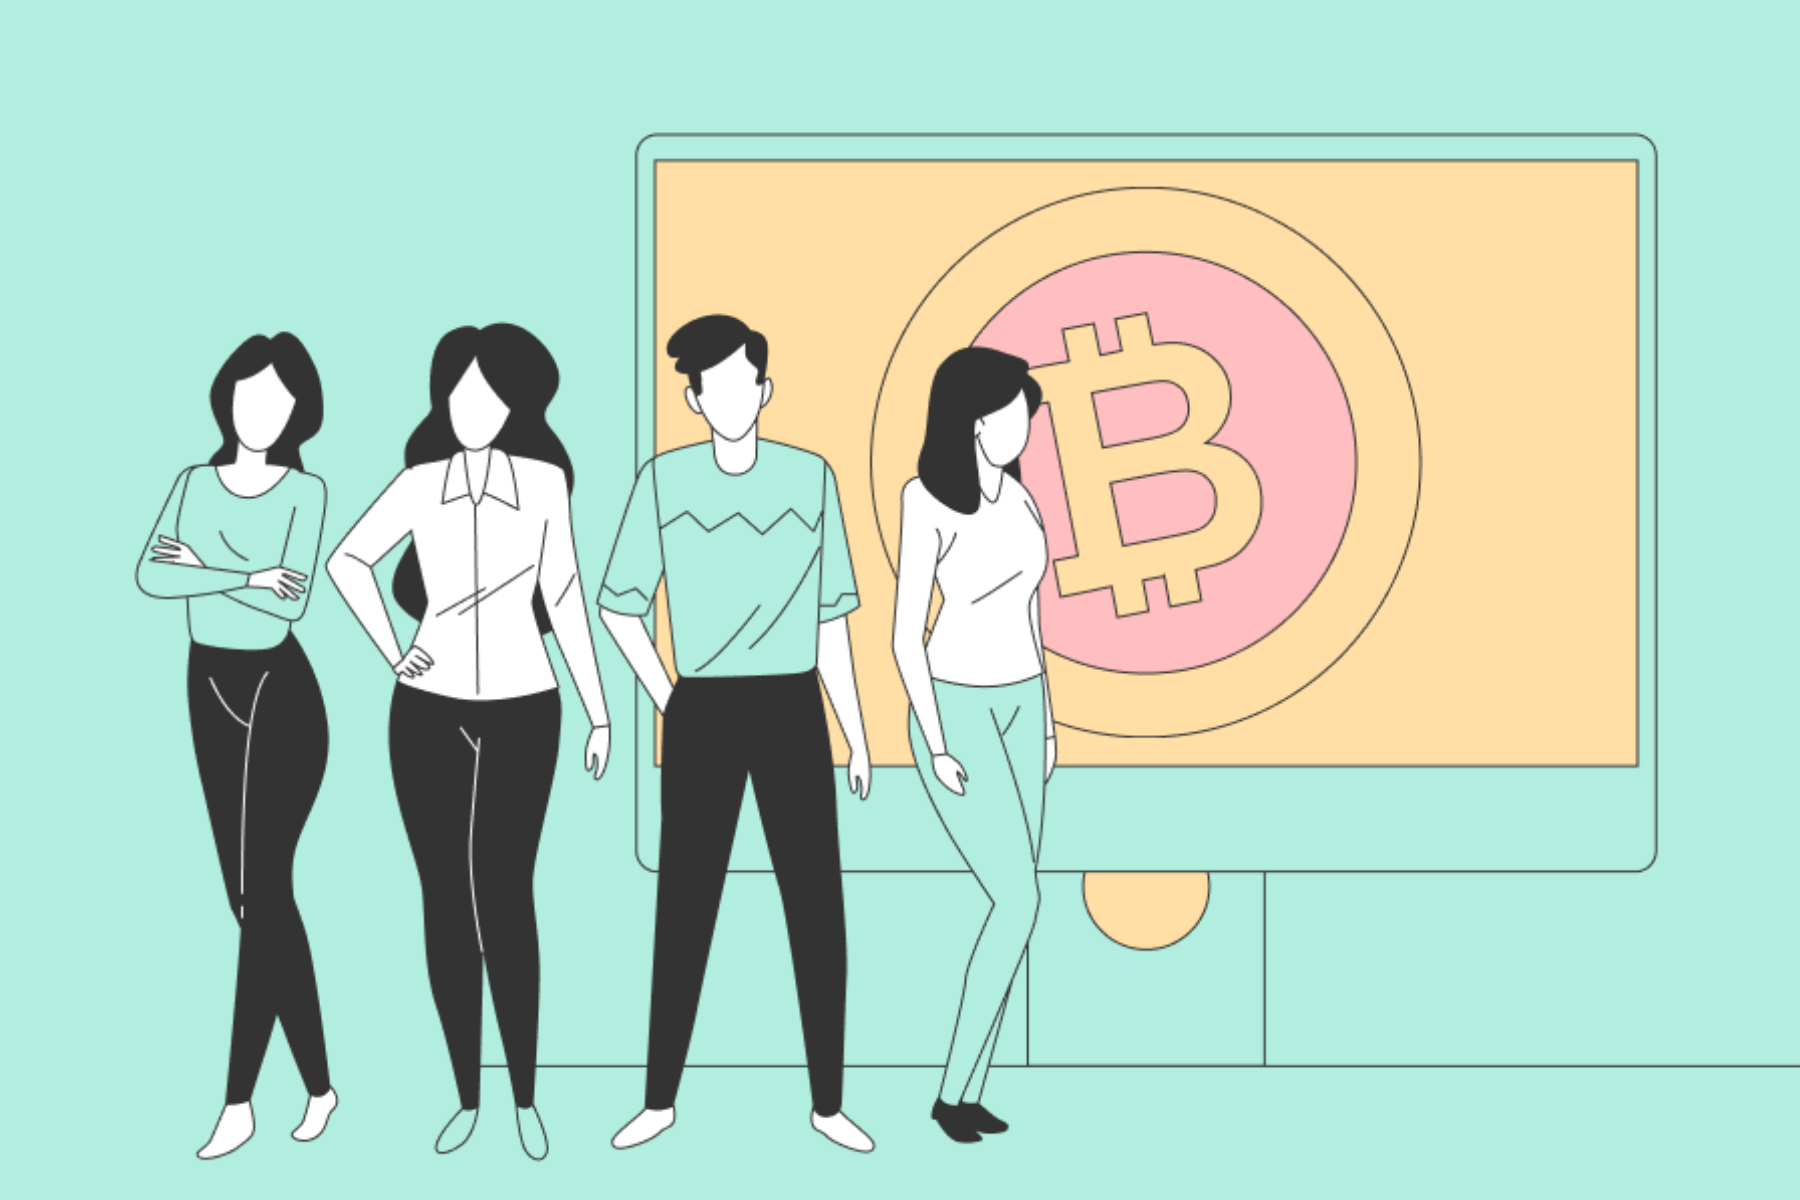 A crowd of individuals standing beside a massive display featuring the Bitcoin emblem